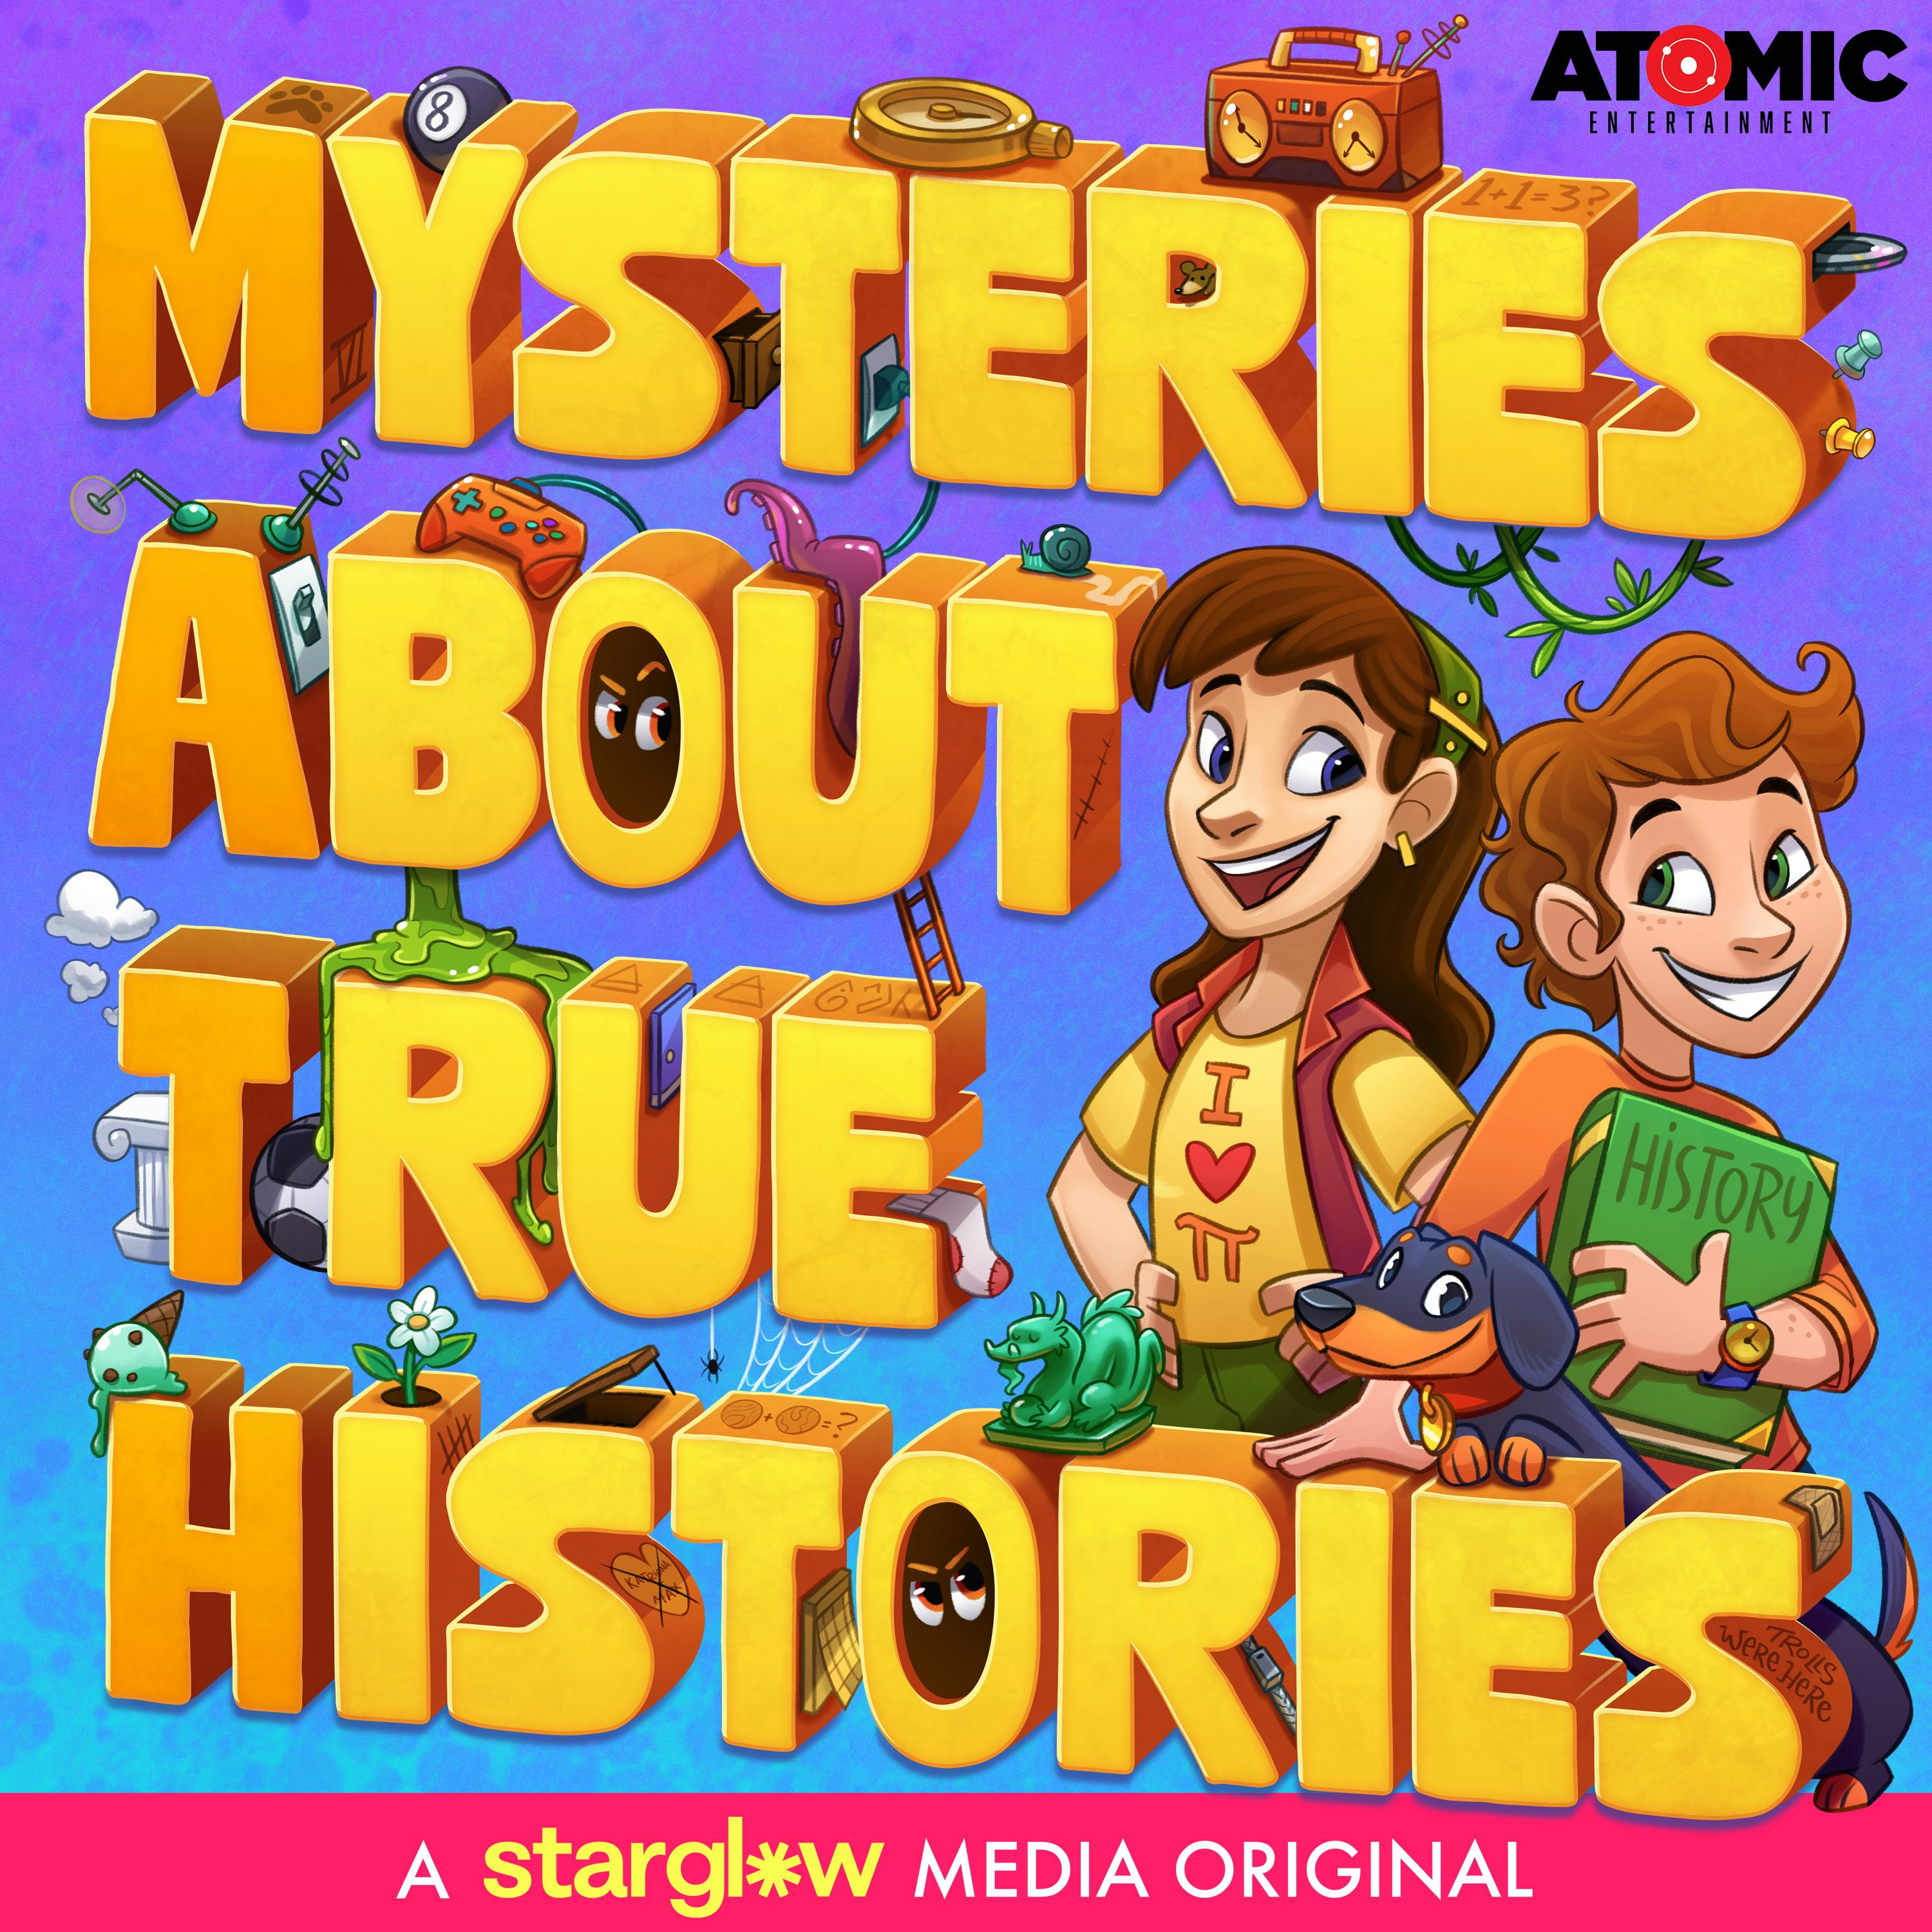 Introducing: Mysteries About True Histories by Starglow Media / Atomic Entertainment